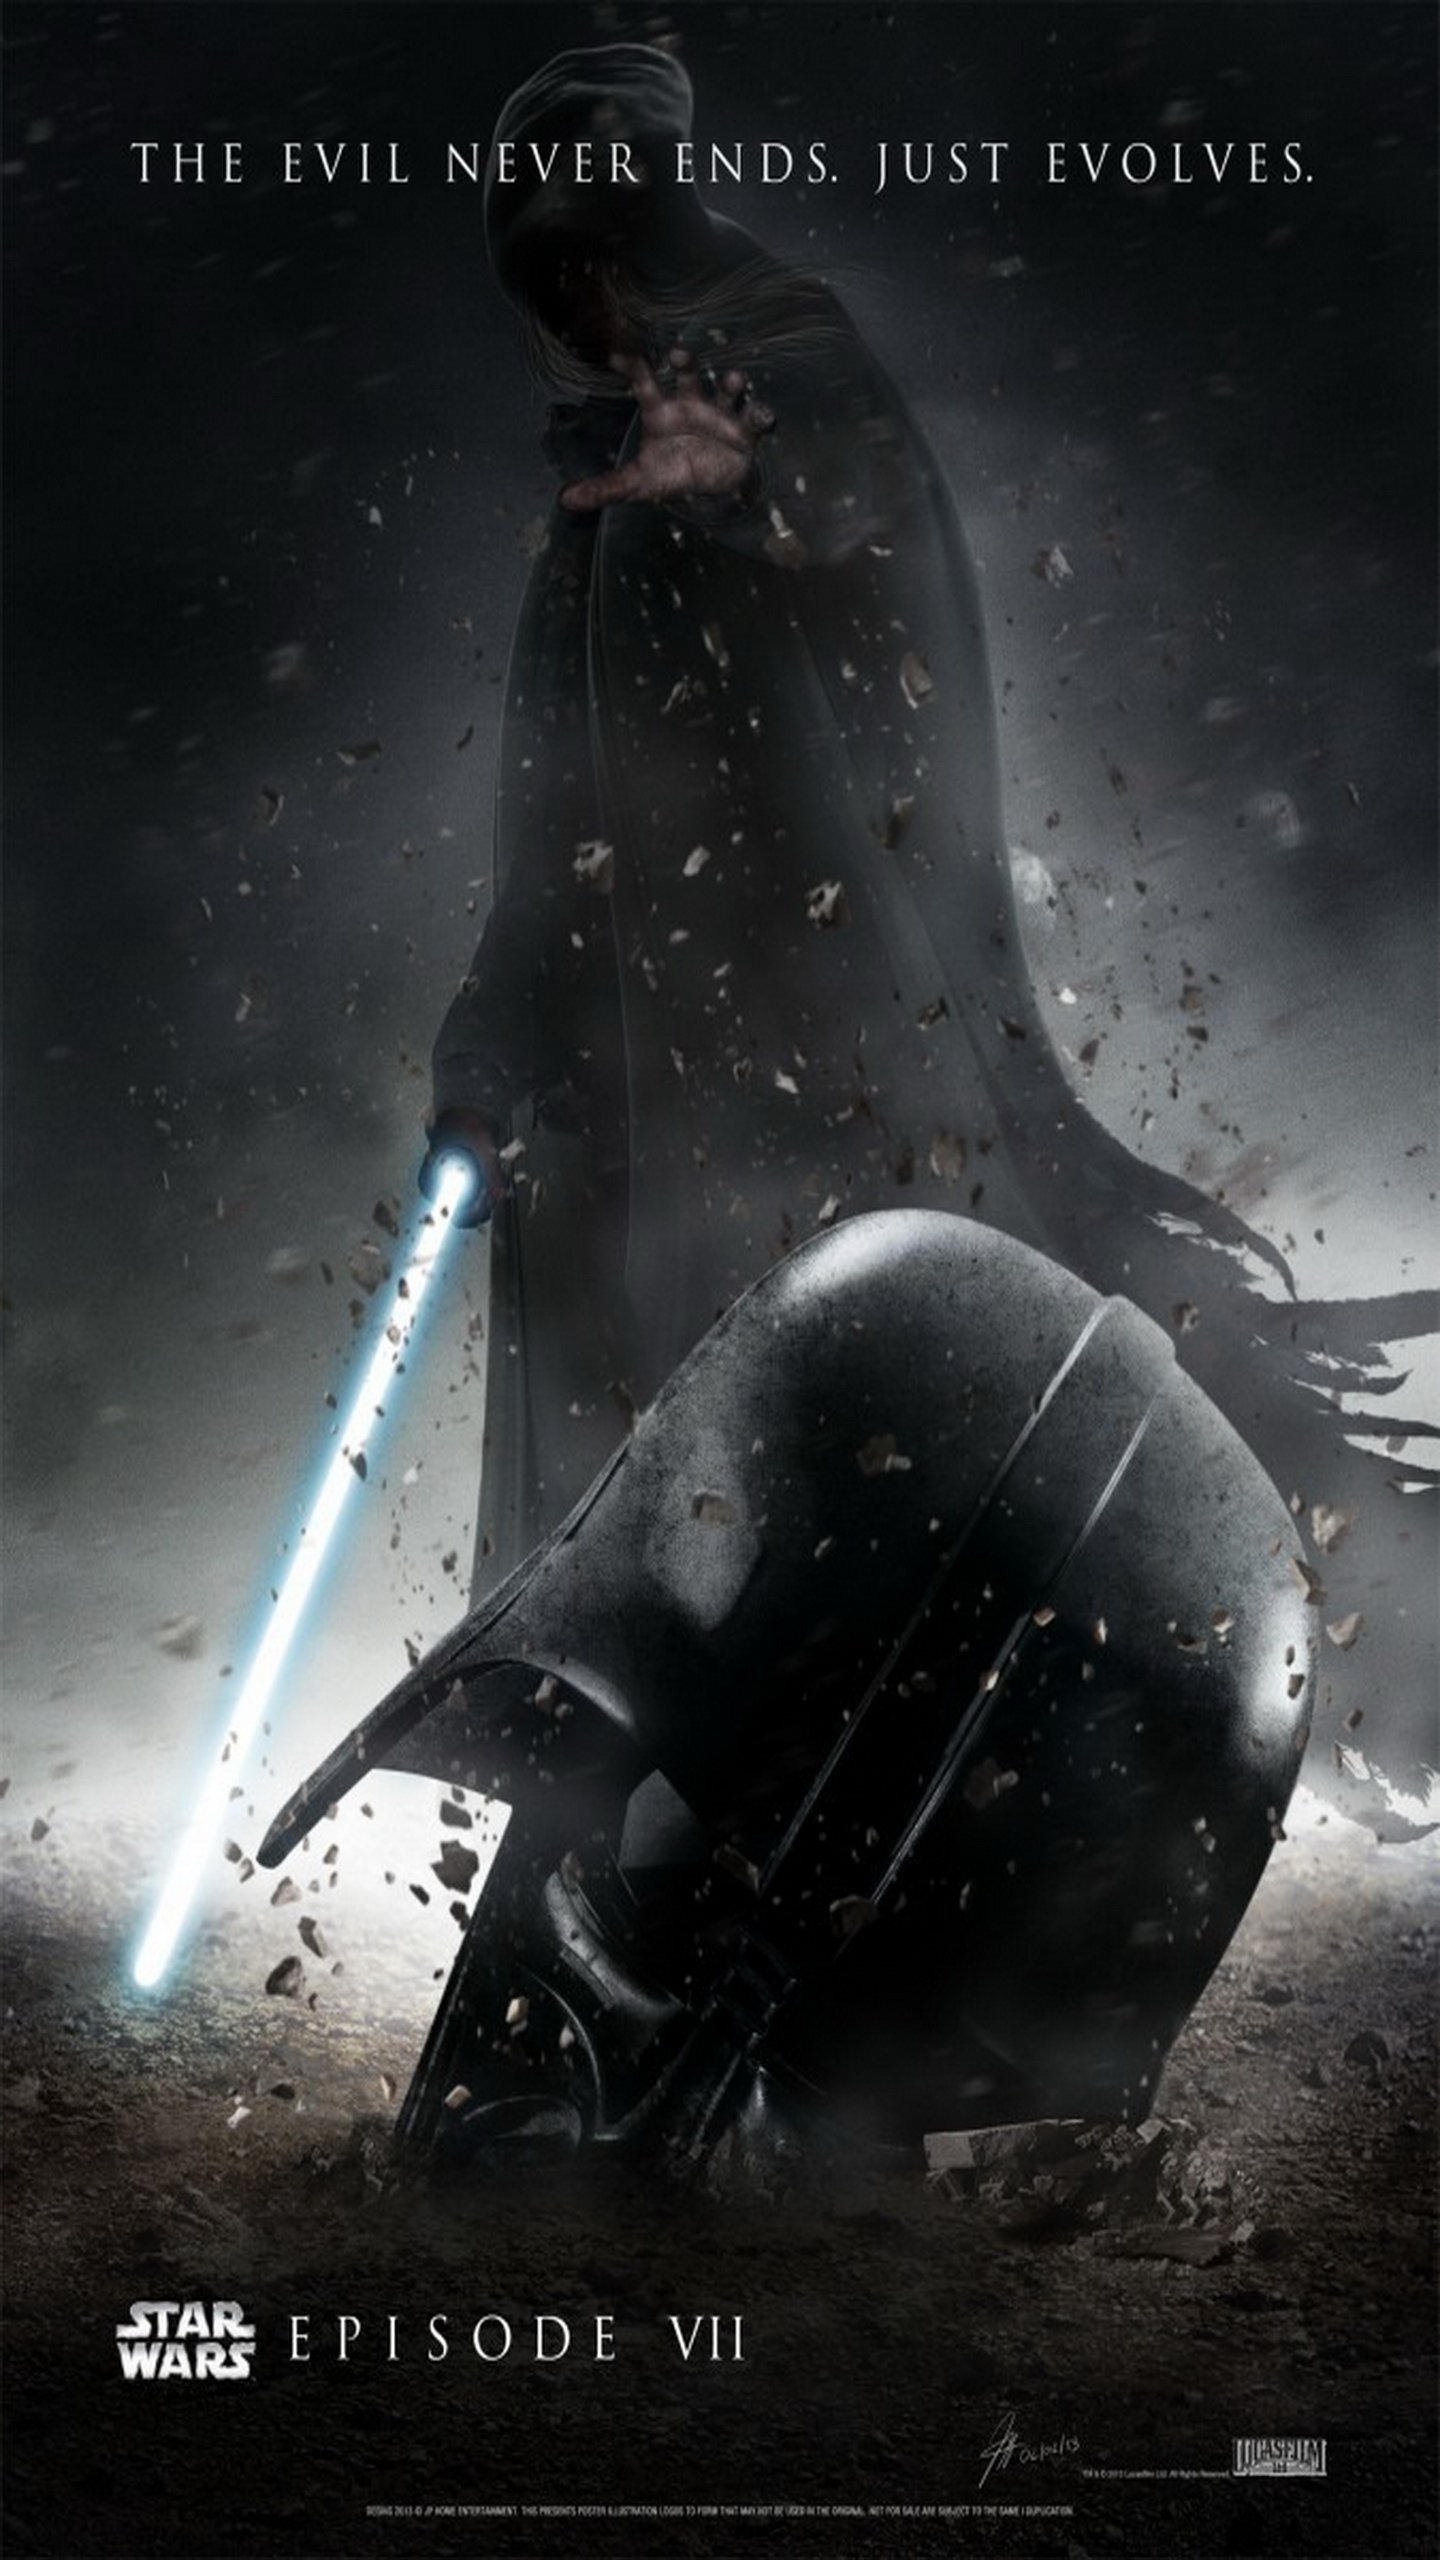  Episode VII The Force Awakens Poster Galaxy Note Wallpaper